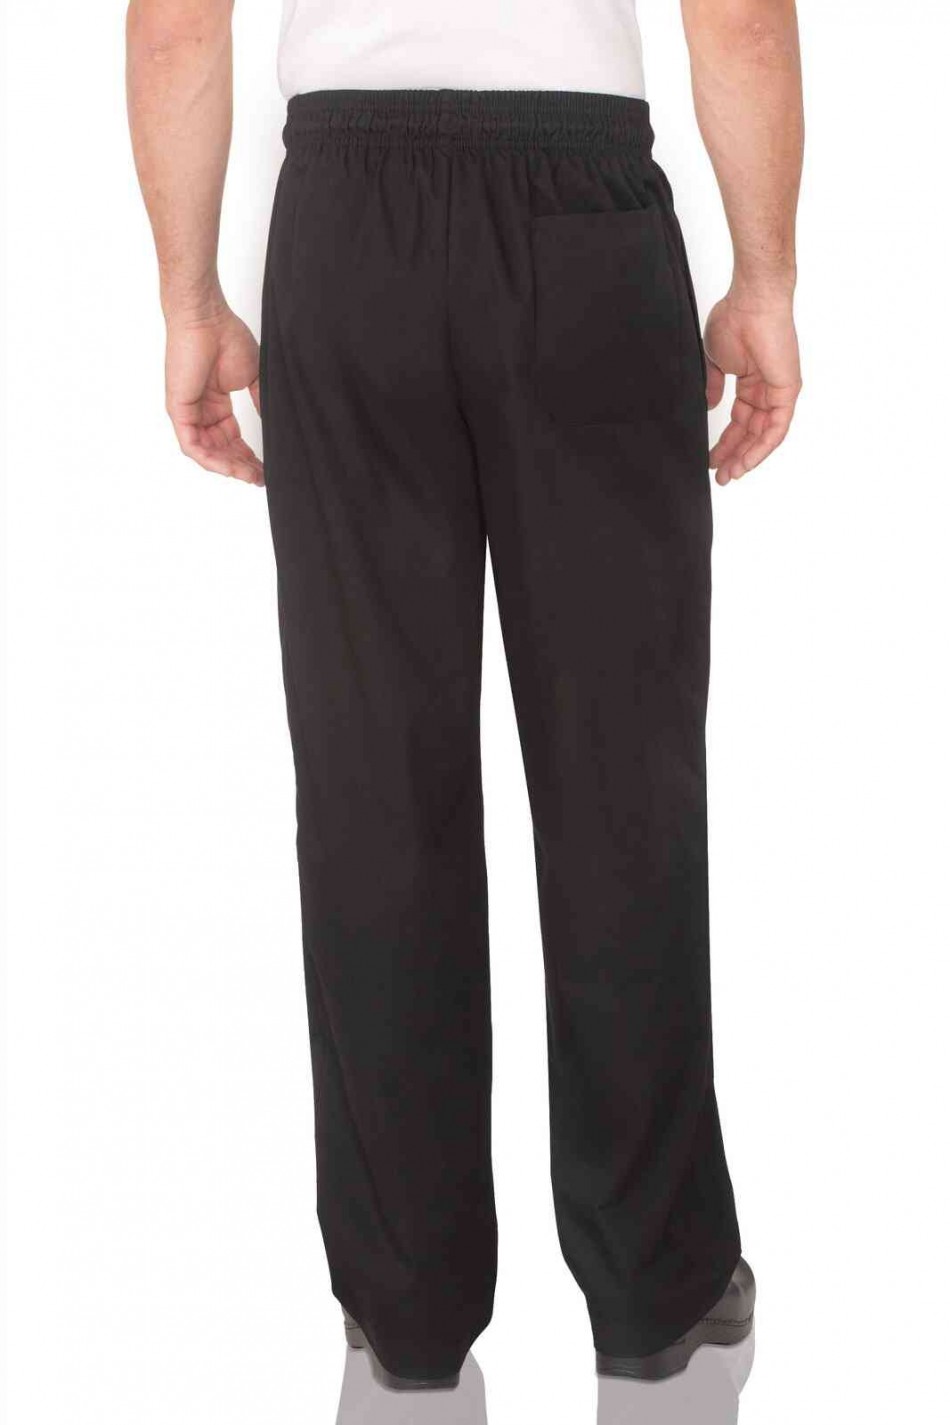 Mens Black Essential Baggy Chef Pants by Chef Works